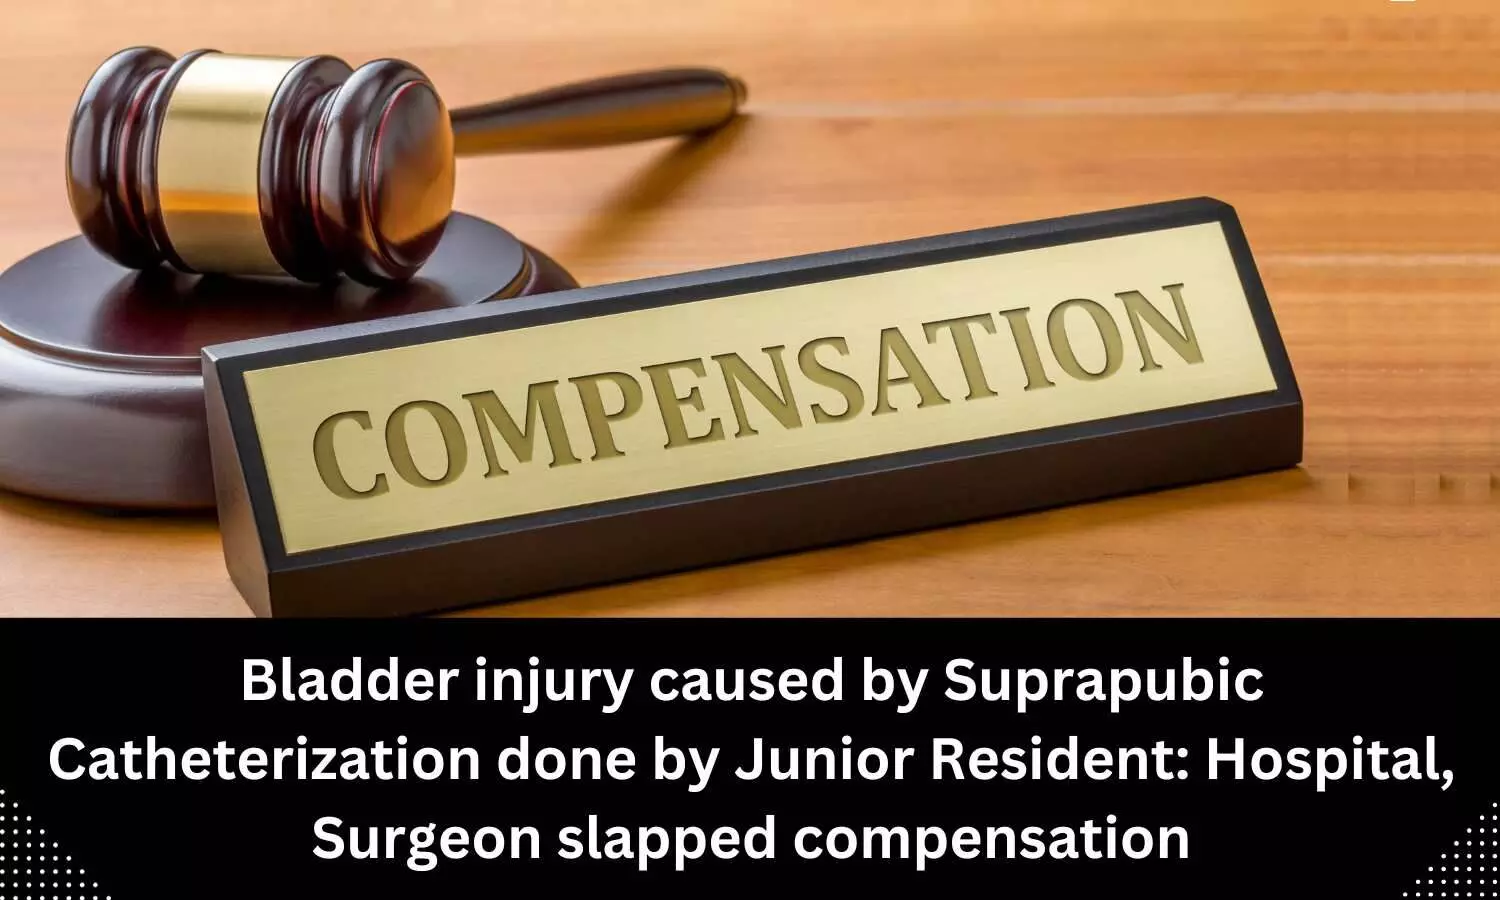 Bladder injury caused by Suprapubic Catheterization done by Junior Resident: Hospital, Surgeon slapped compensation